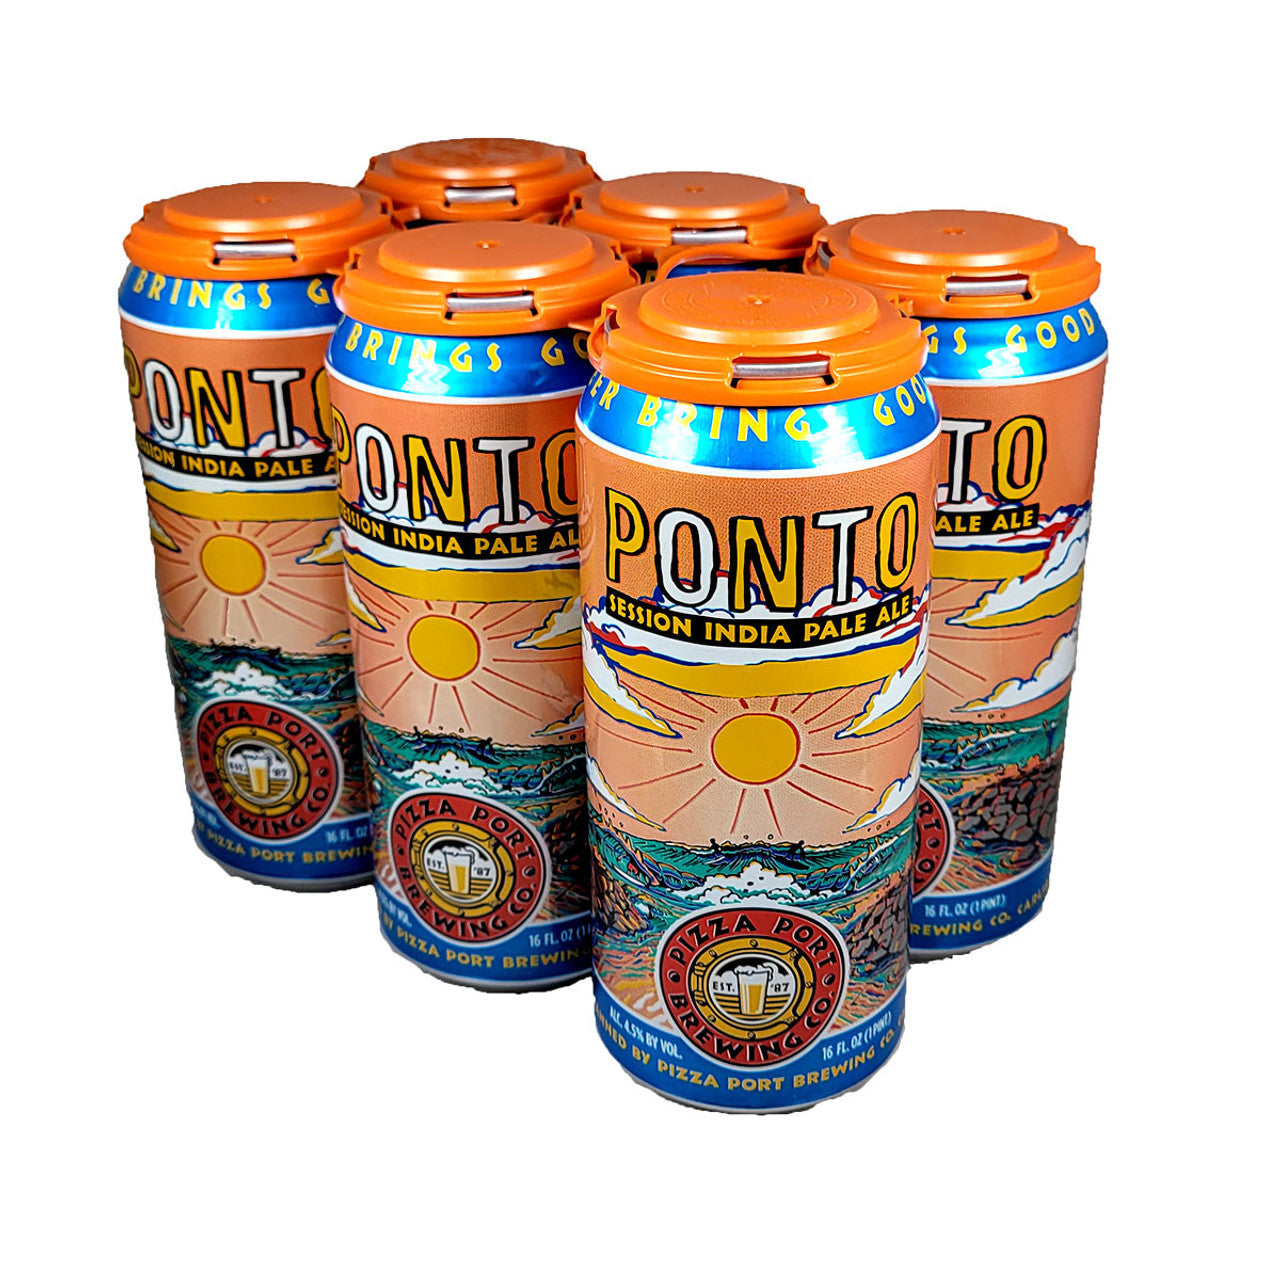 Pizza Port Brewing Co. Ponto 6-Pack (16 FL OZ Per Can)